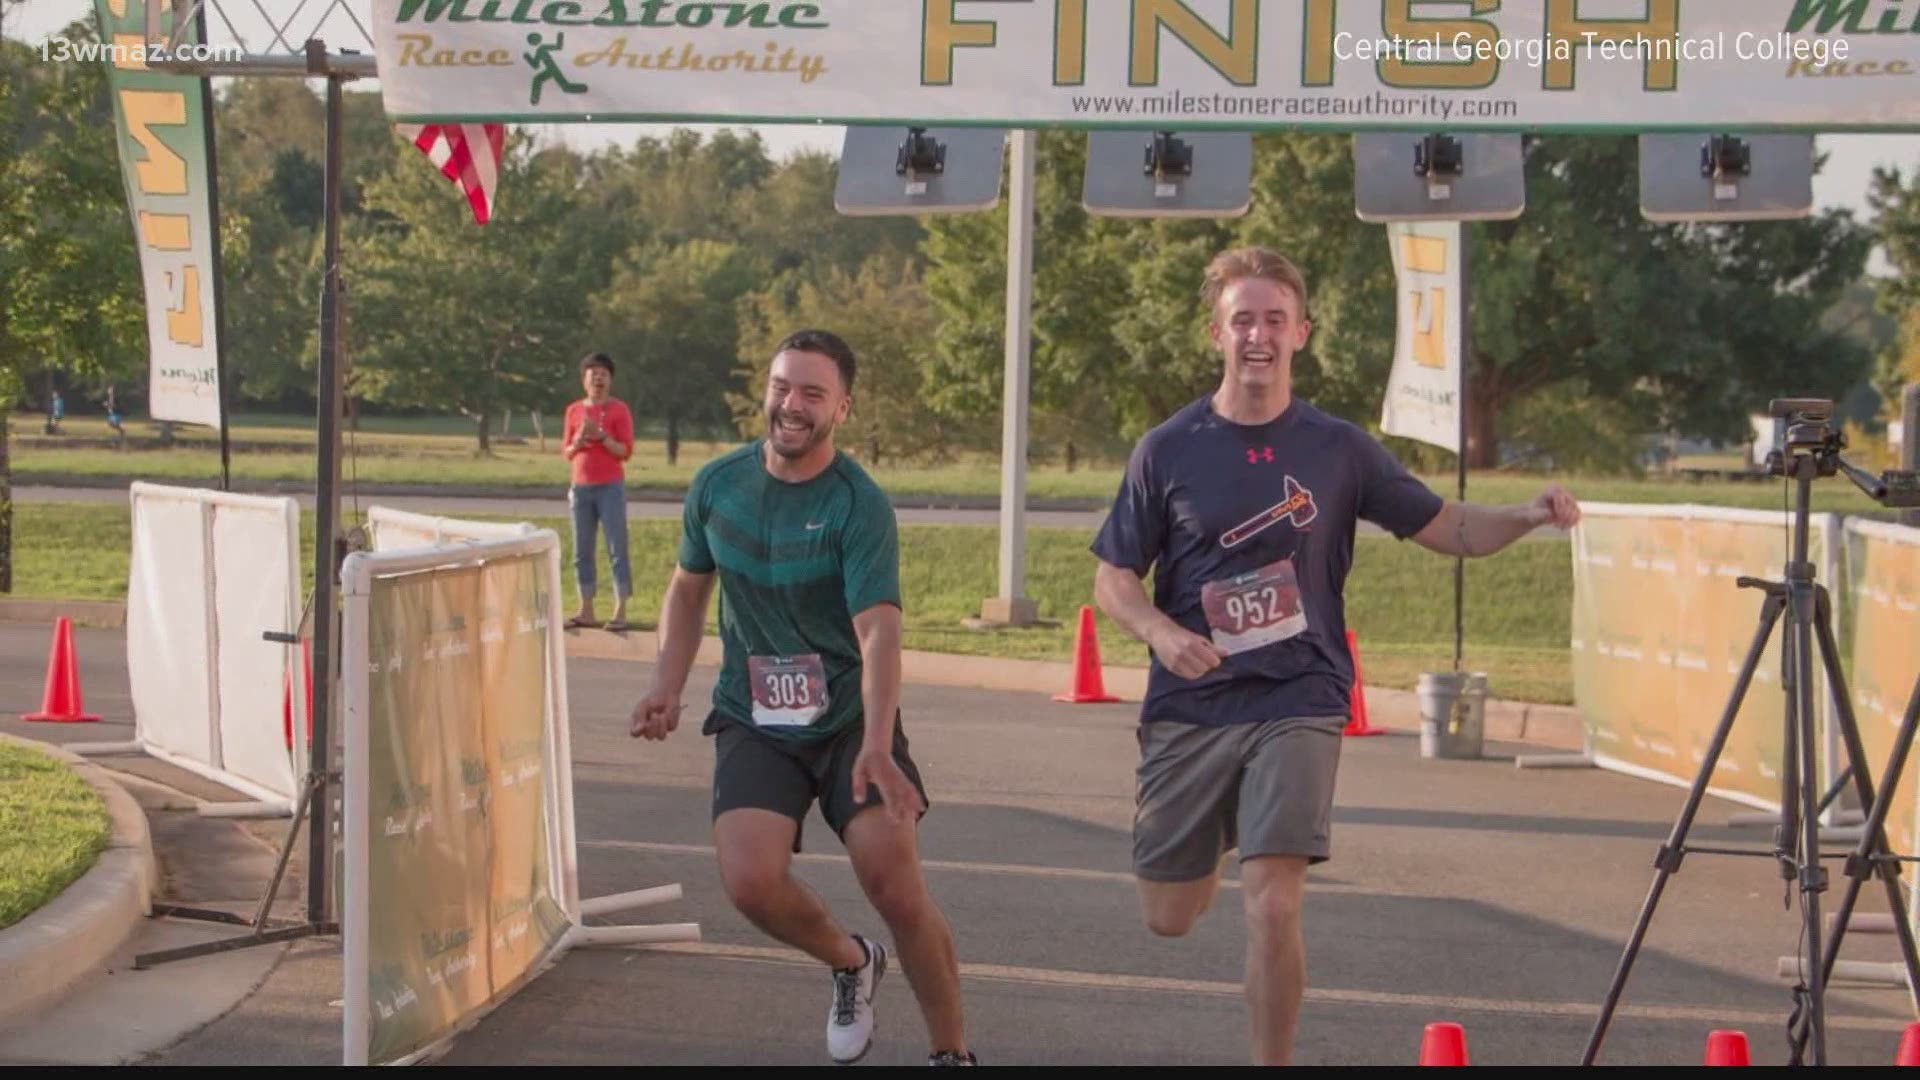 Throughout this week, Central Georgia Technical College is taking its 11th Annual Race for Education 5K and Fun Run online.